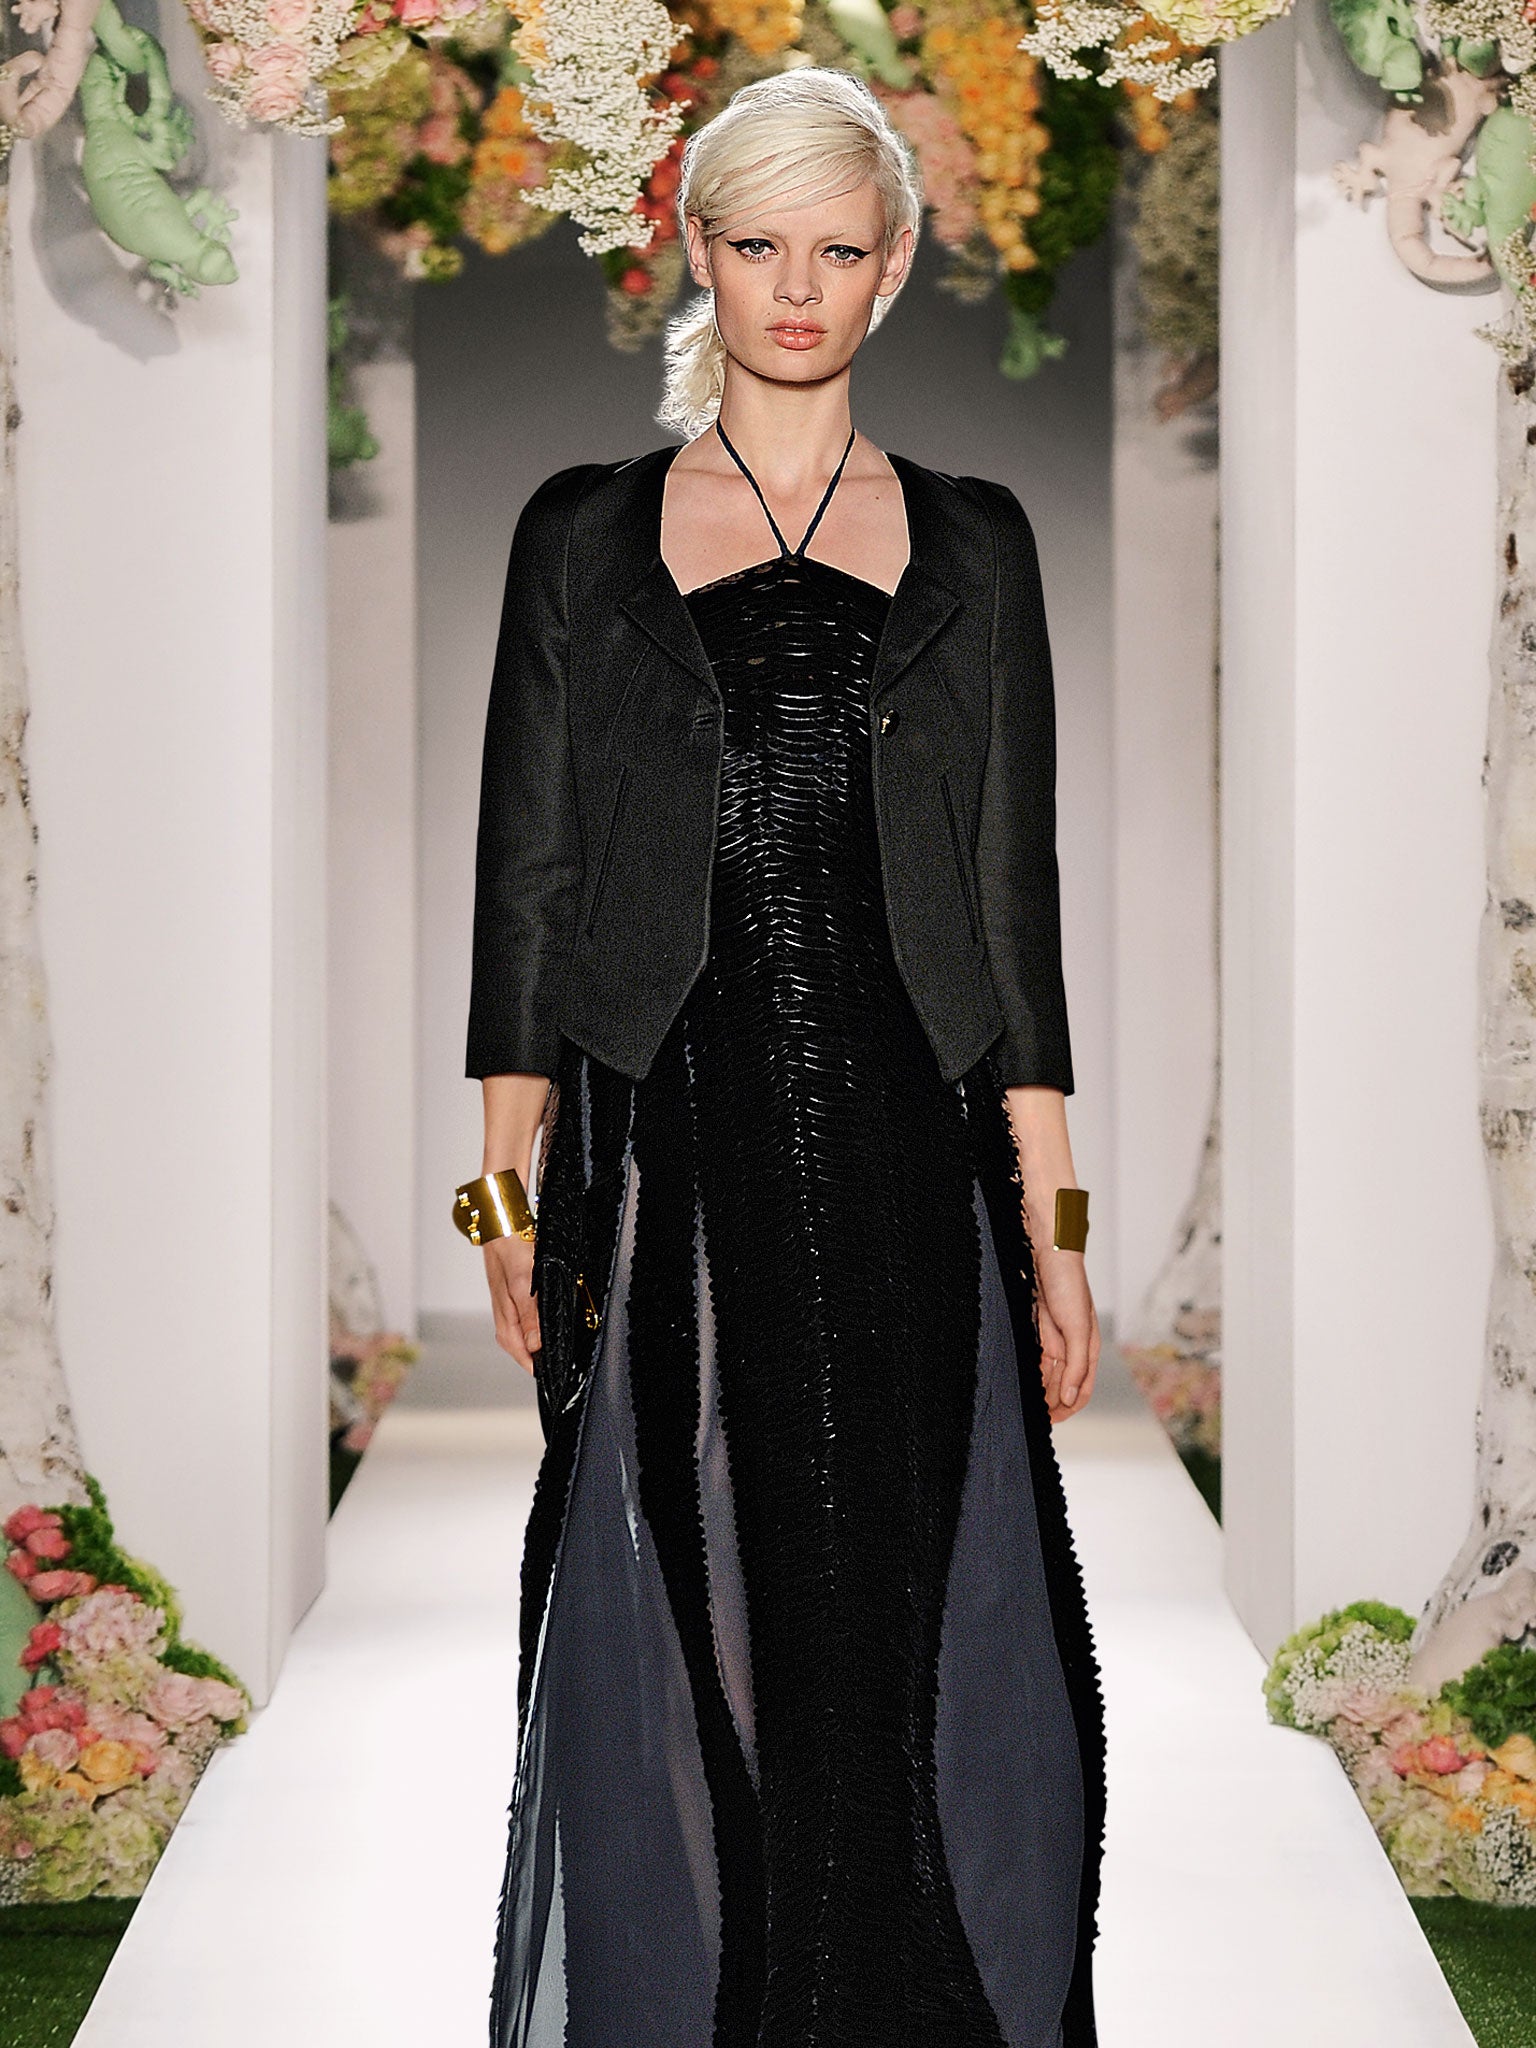 One of Mulberry's Spring/Summer 2013 designs